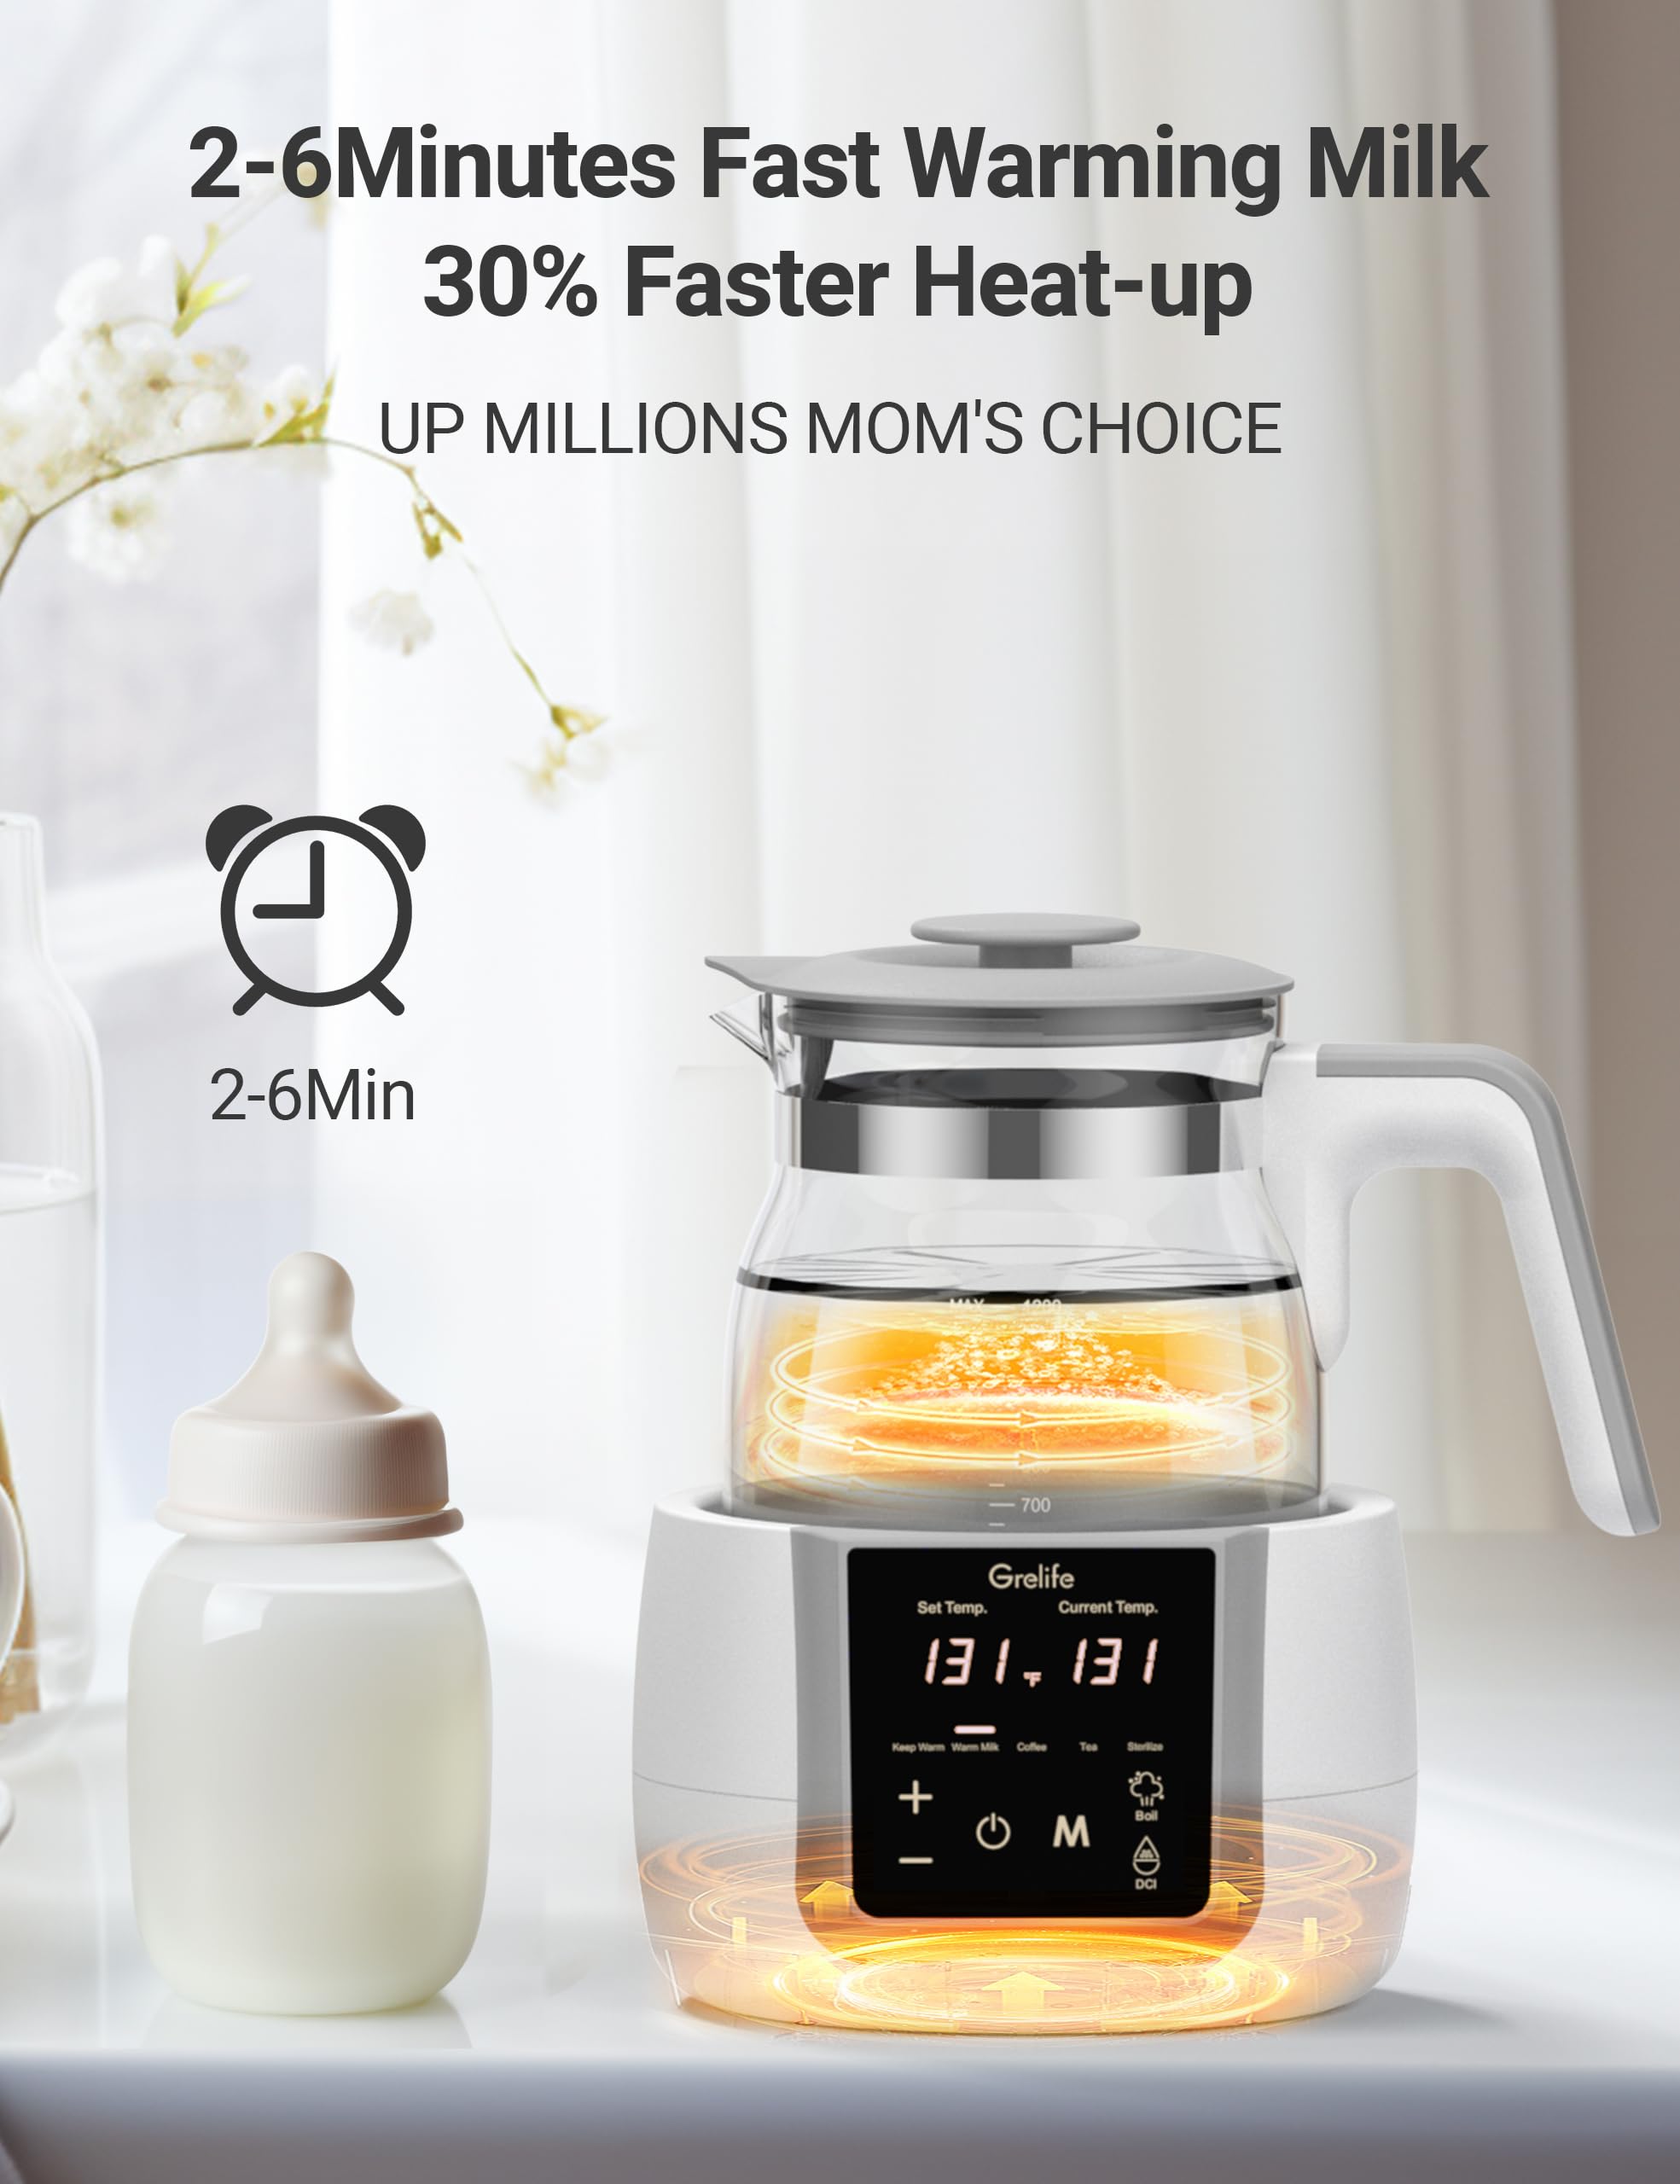 Bottle Warmer,Grelife 9-in-1 Fast Portable Instant Baby Milk Warme with 72H Keep Warm,Accurate Temperature Control,with Defrost, Sterili-zing, Heat Baby Food Jars for Breastmilk,Formula,Tea,Coffee